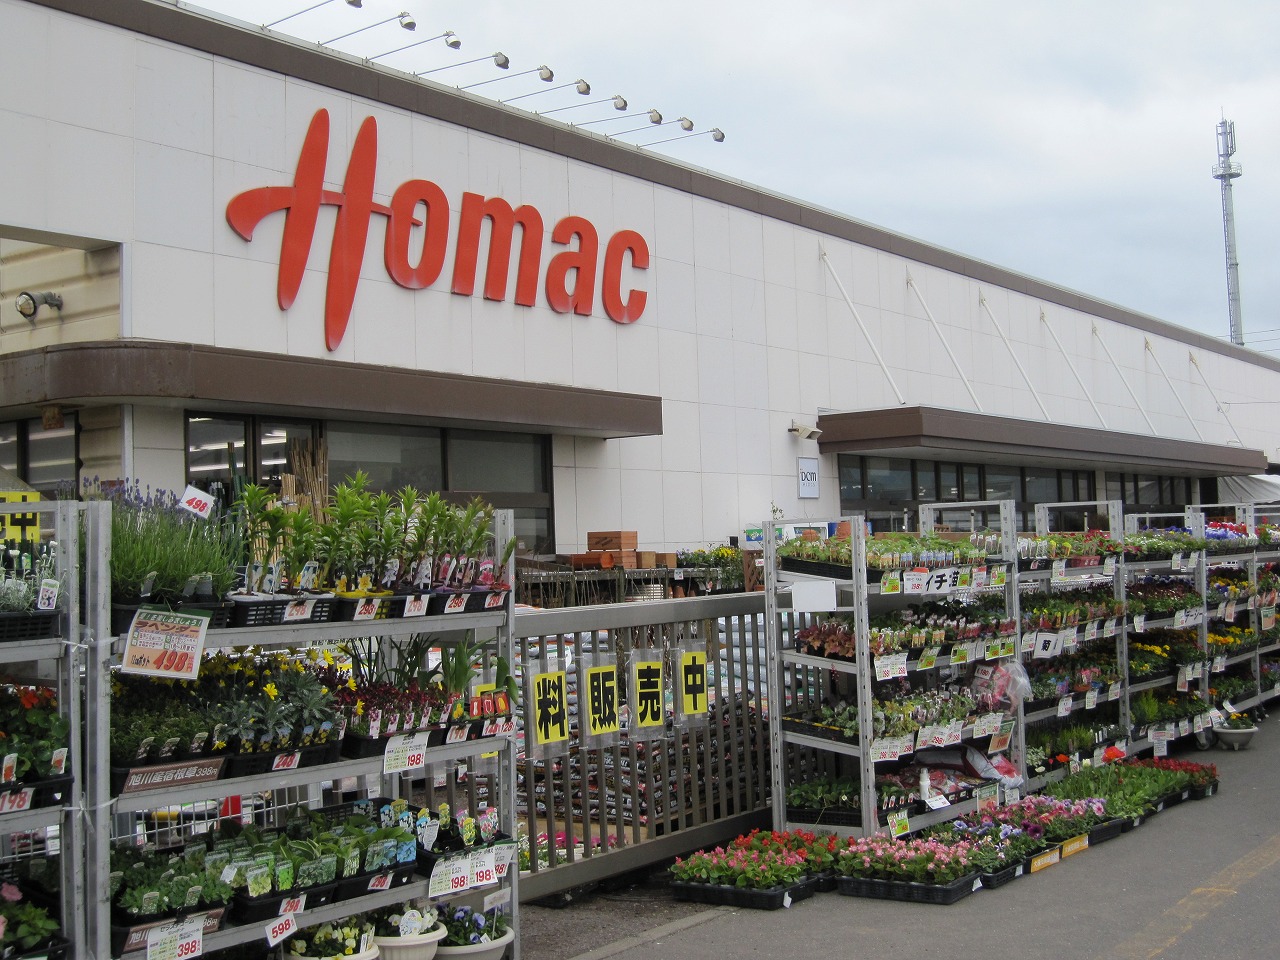 Home center. Homac Corporation Itoi to the store (hardware store) 2671m